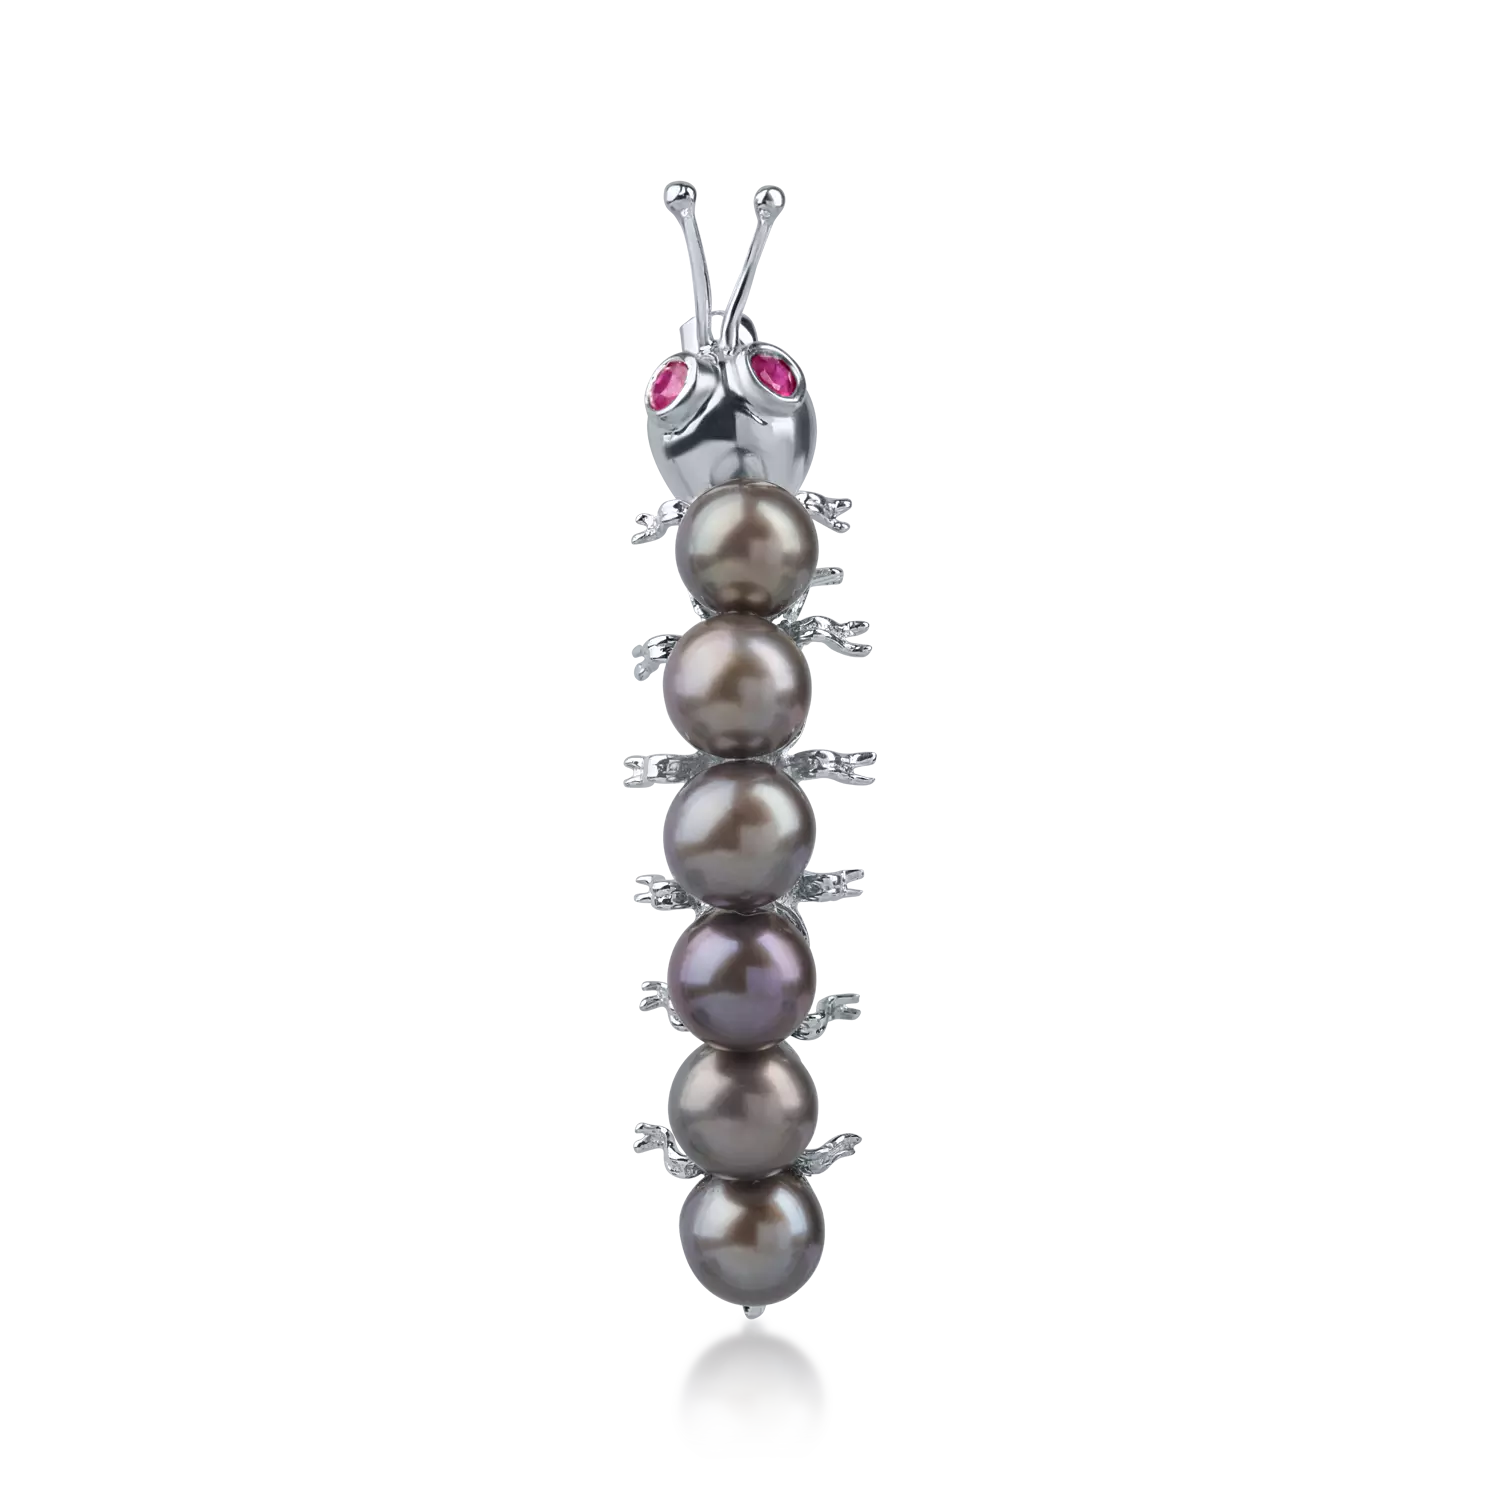 White gold caterpillar brooch with 5.7ct freshwater pearls and 0.08ct rubies